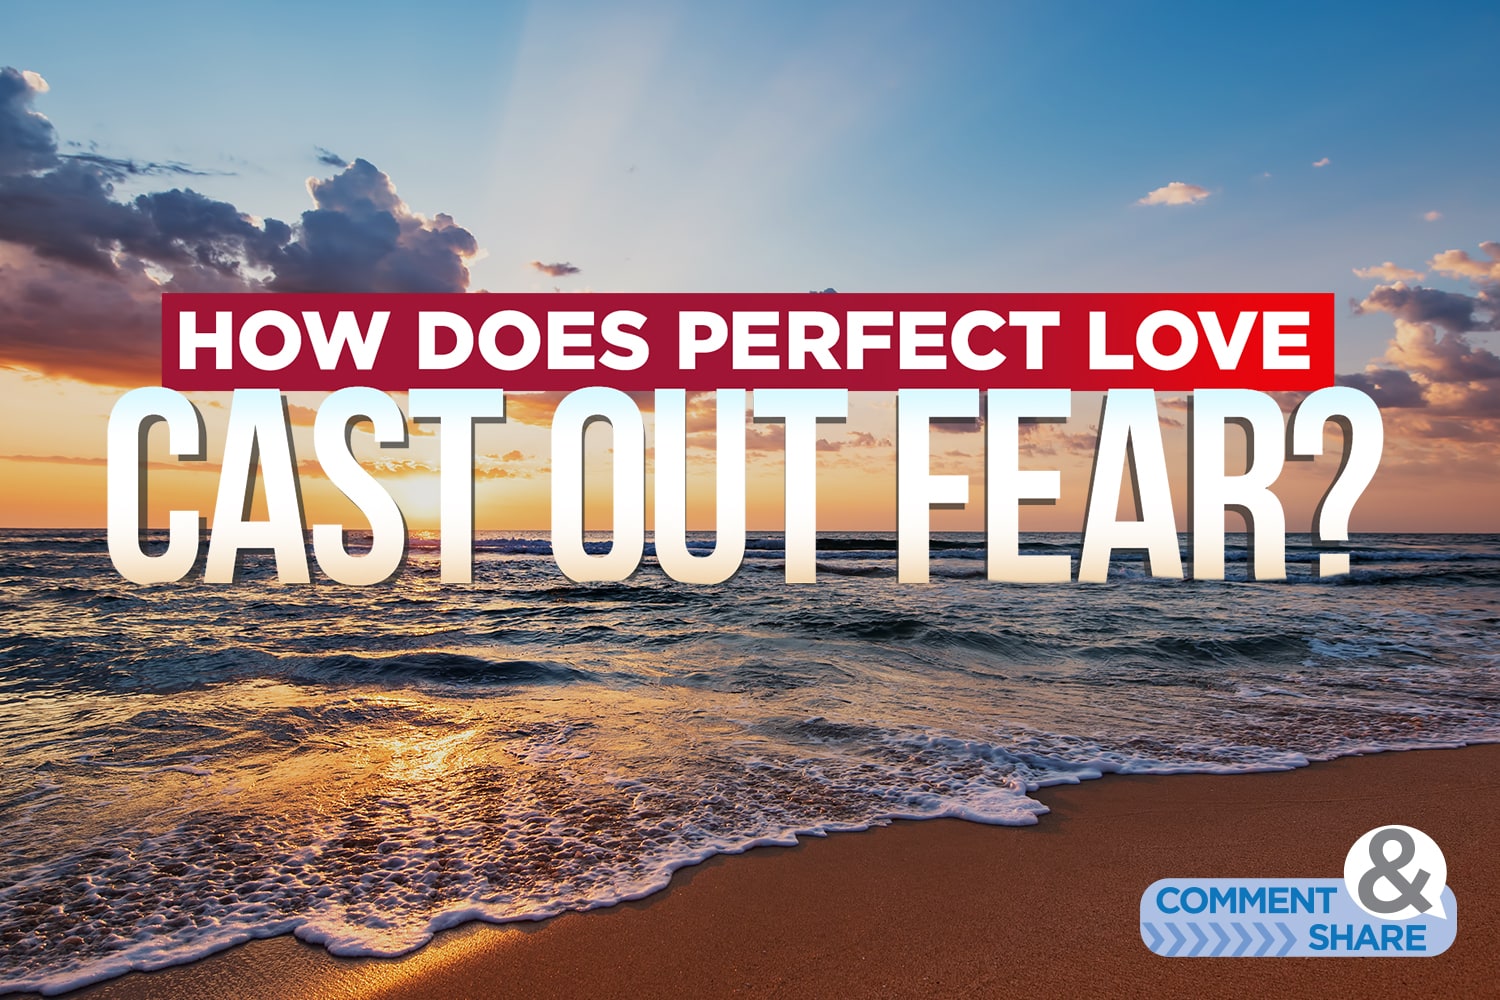 How Does Perfect Love Cast Out Fear?